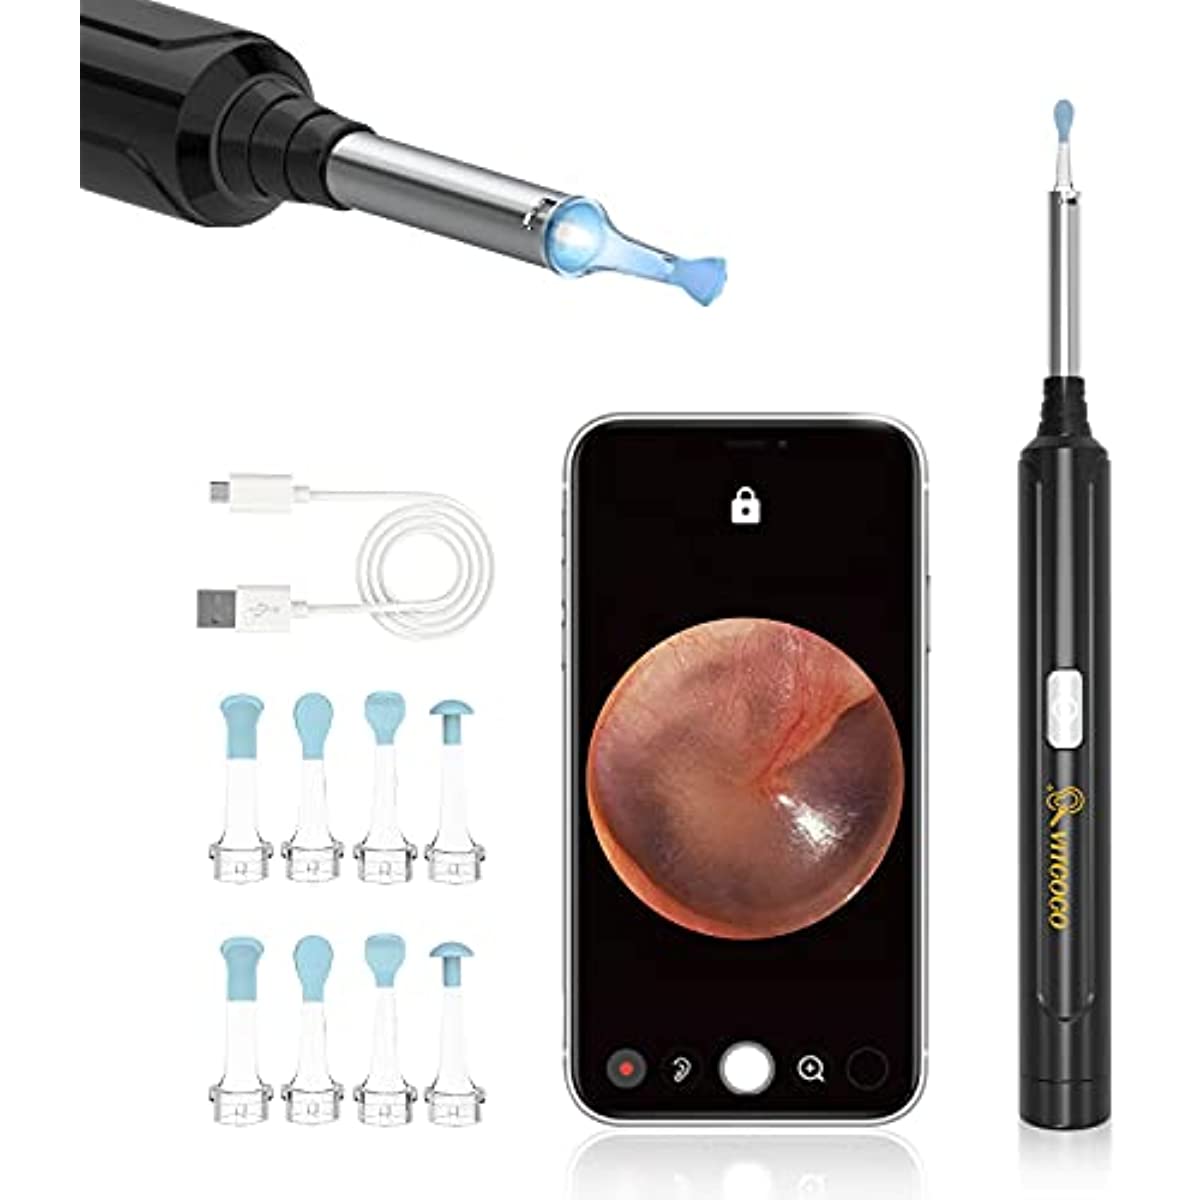 VITCOCO Ear Wax Removal Kit Ear Camera 1296P High-Definition Earwax Cleaner Portable USB Charging Visible 6 LED Otoscope for Android, iPhone, Ipad